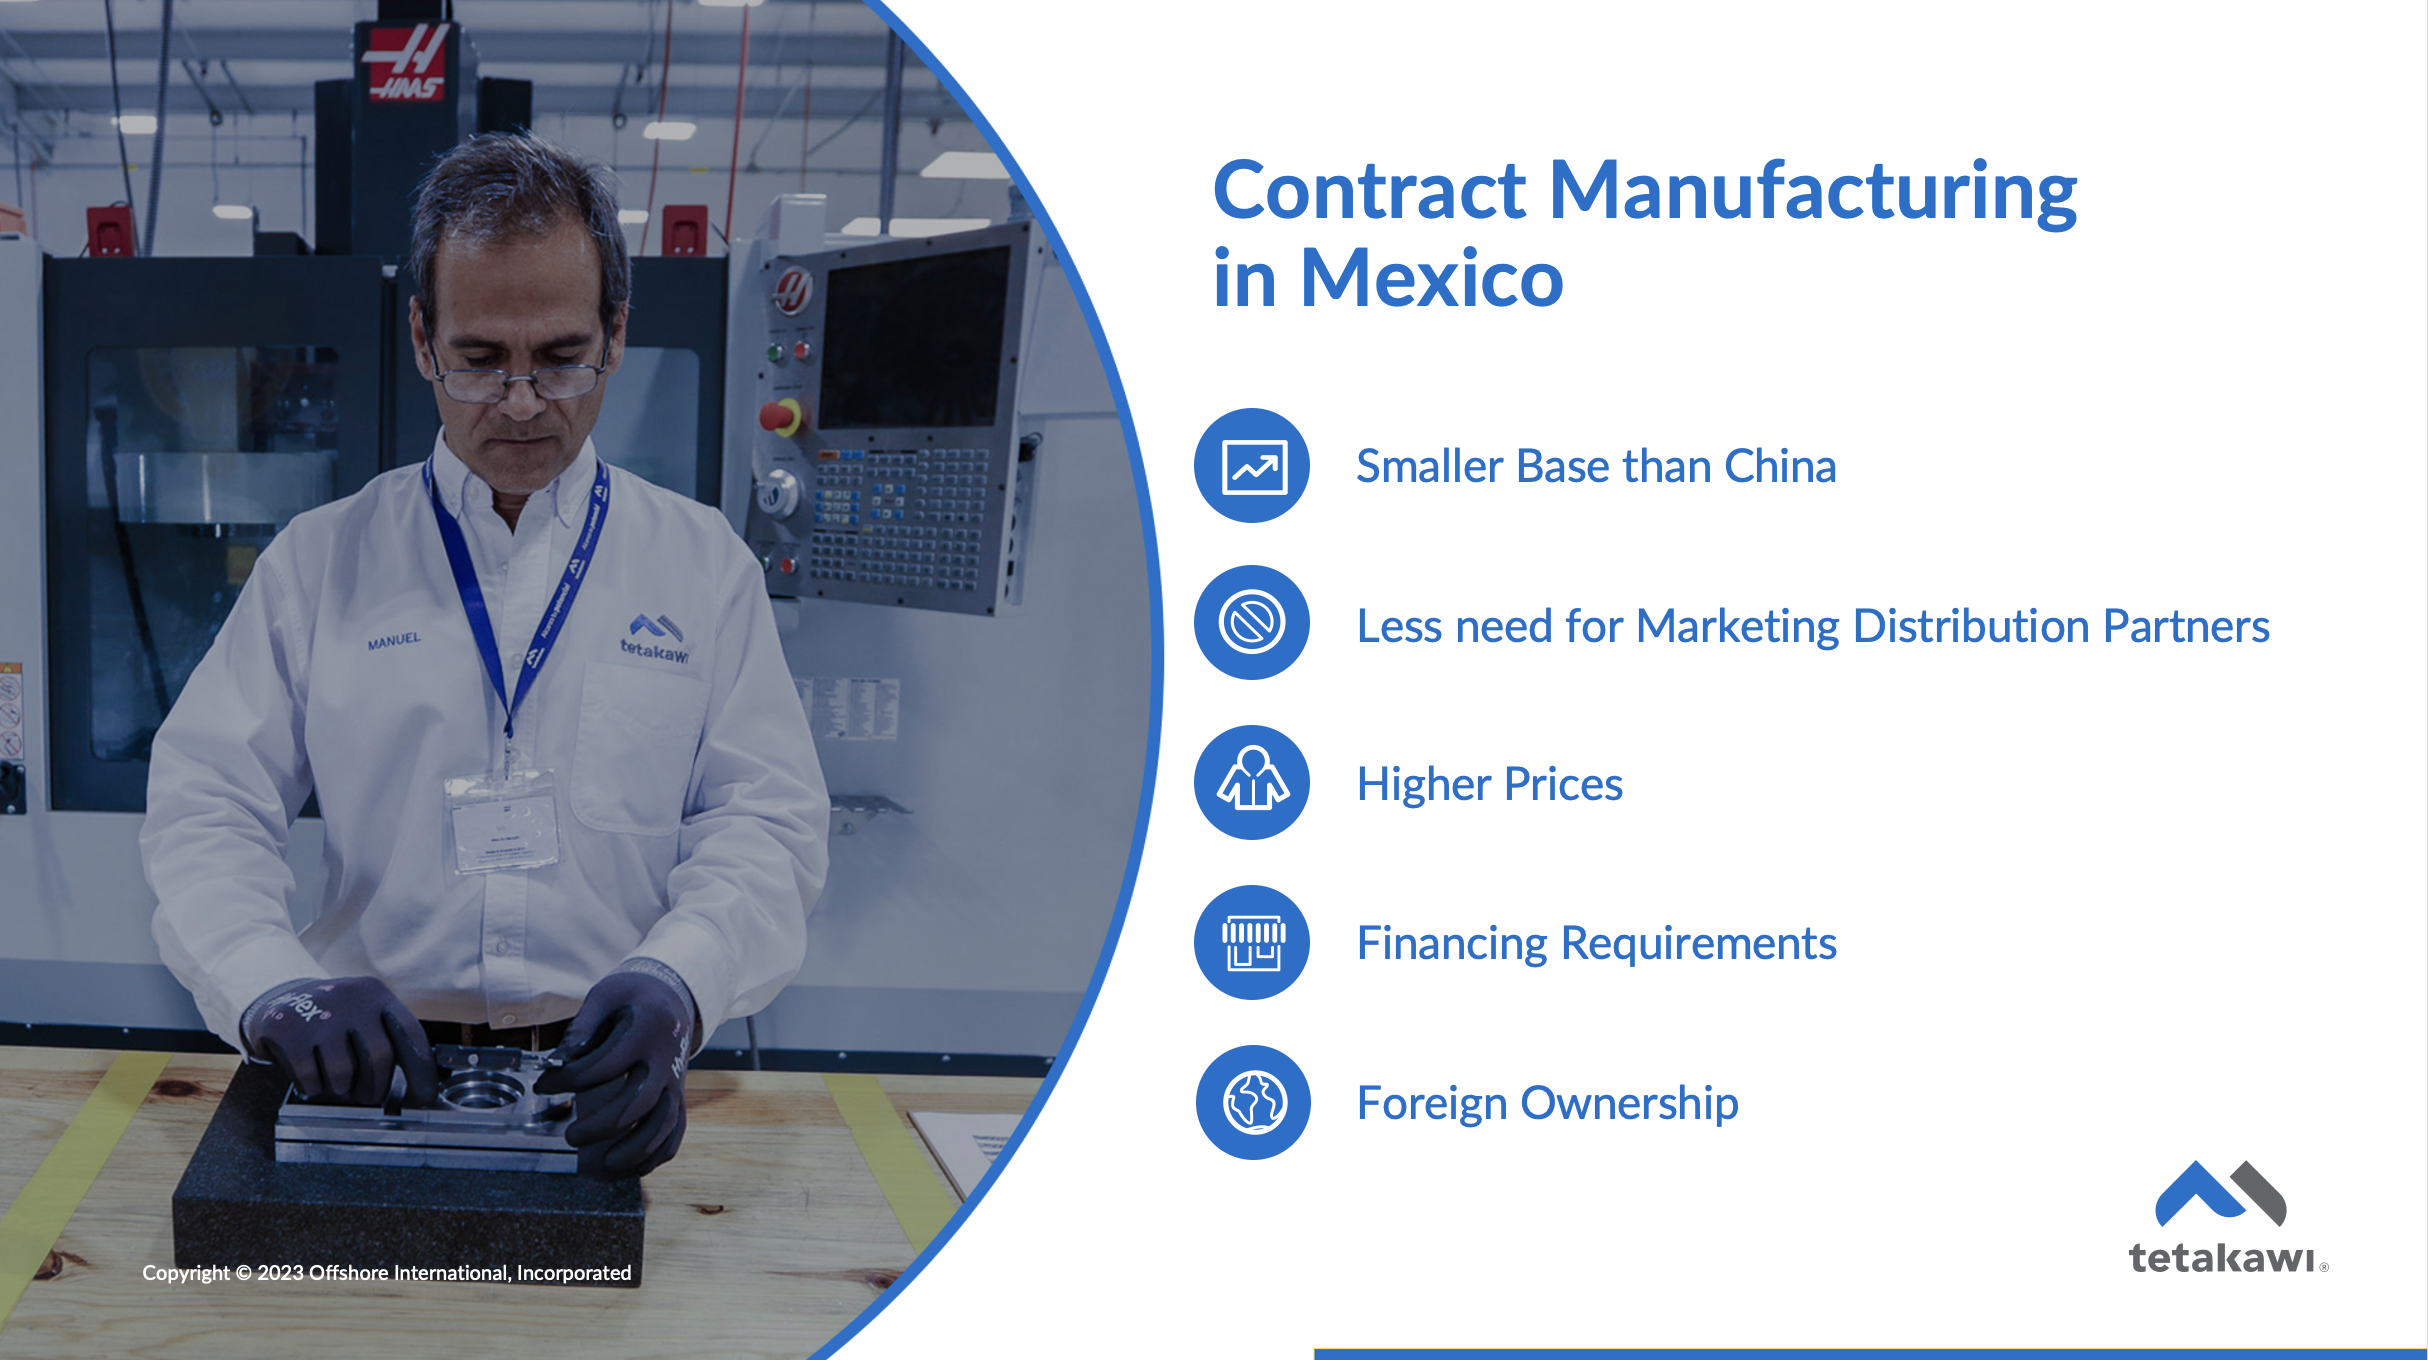 Pros and Cons of Contract Manufacturing as a way to manufacture in Mexico